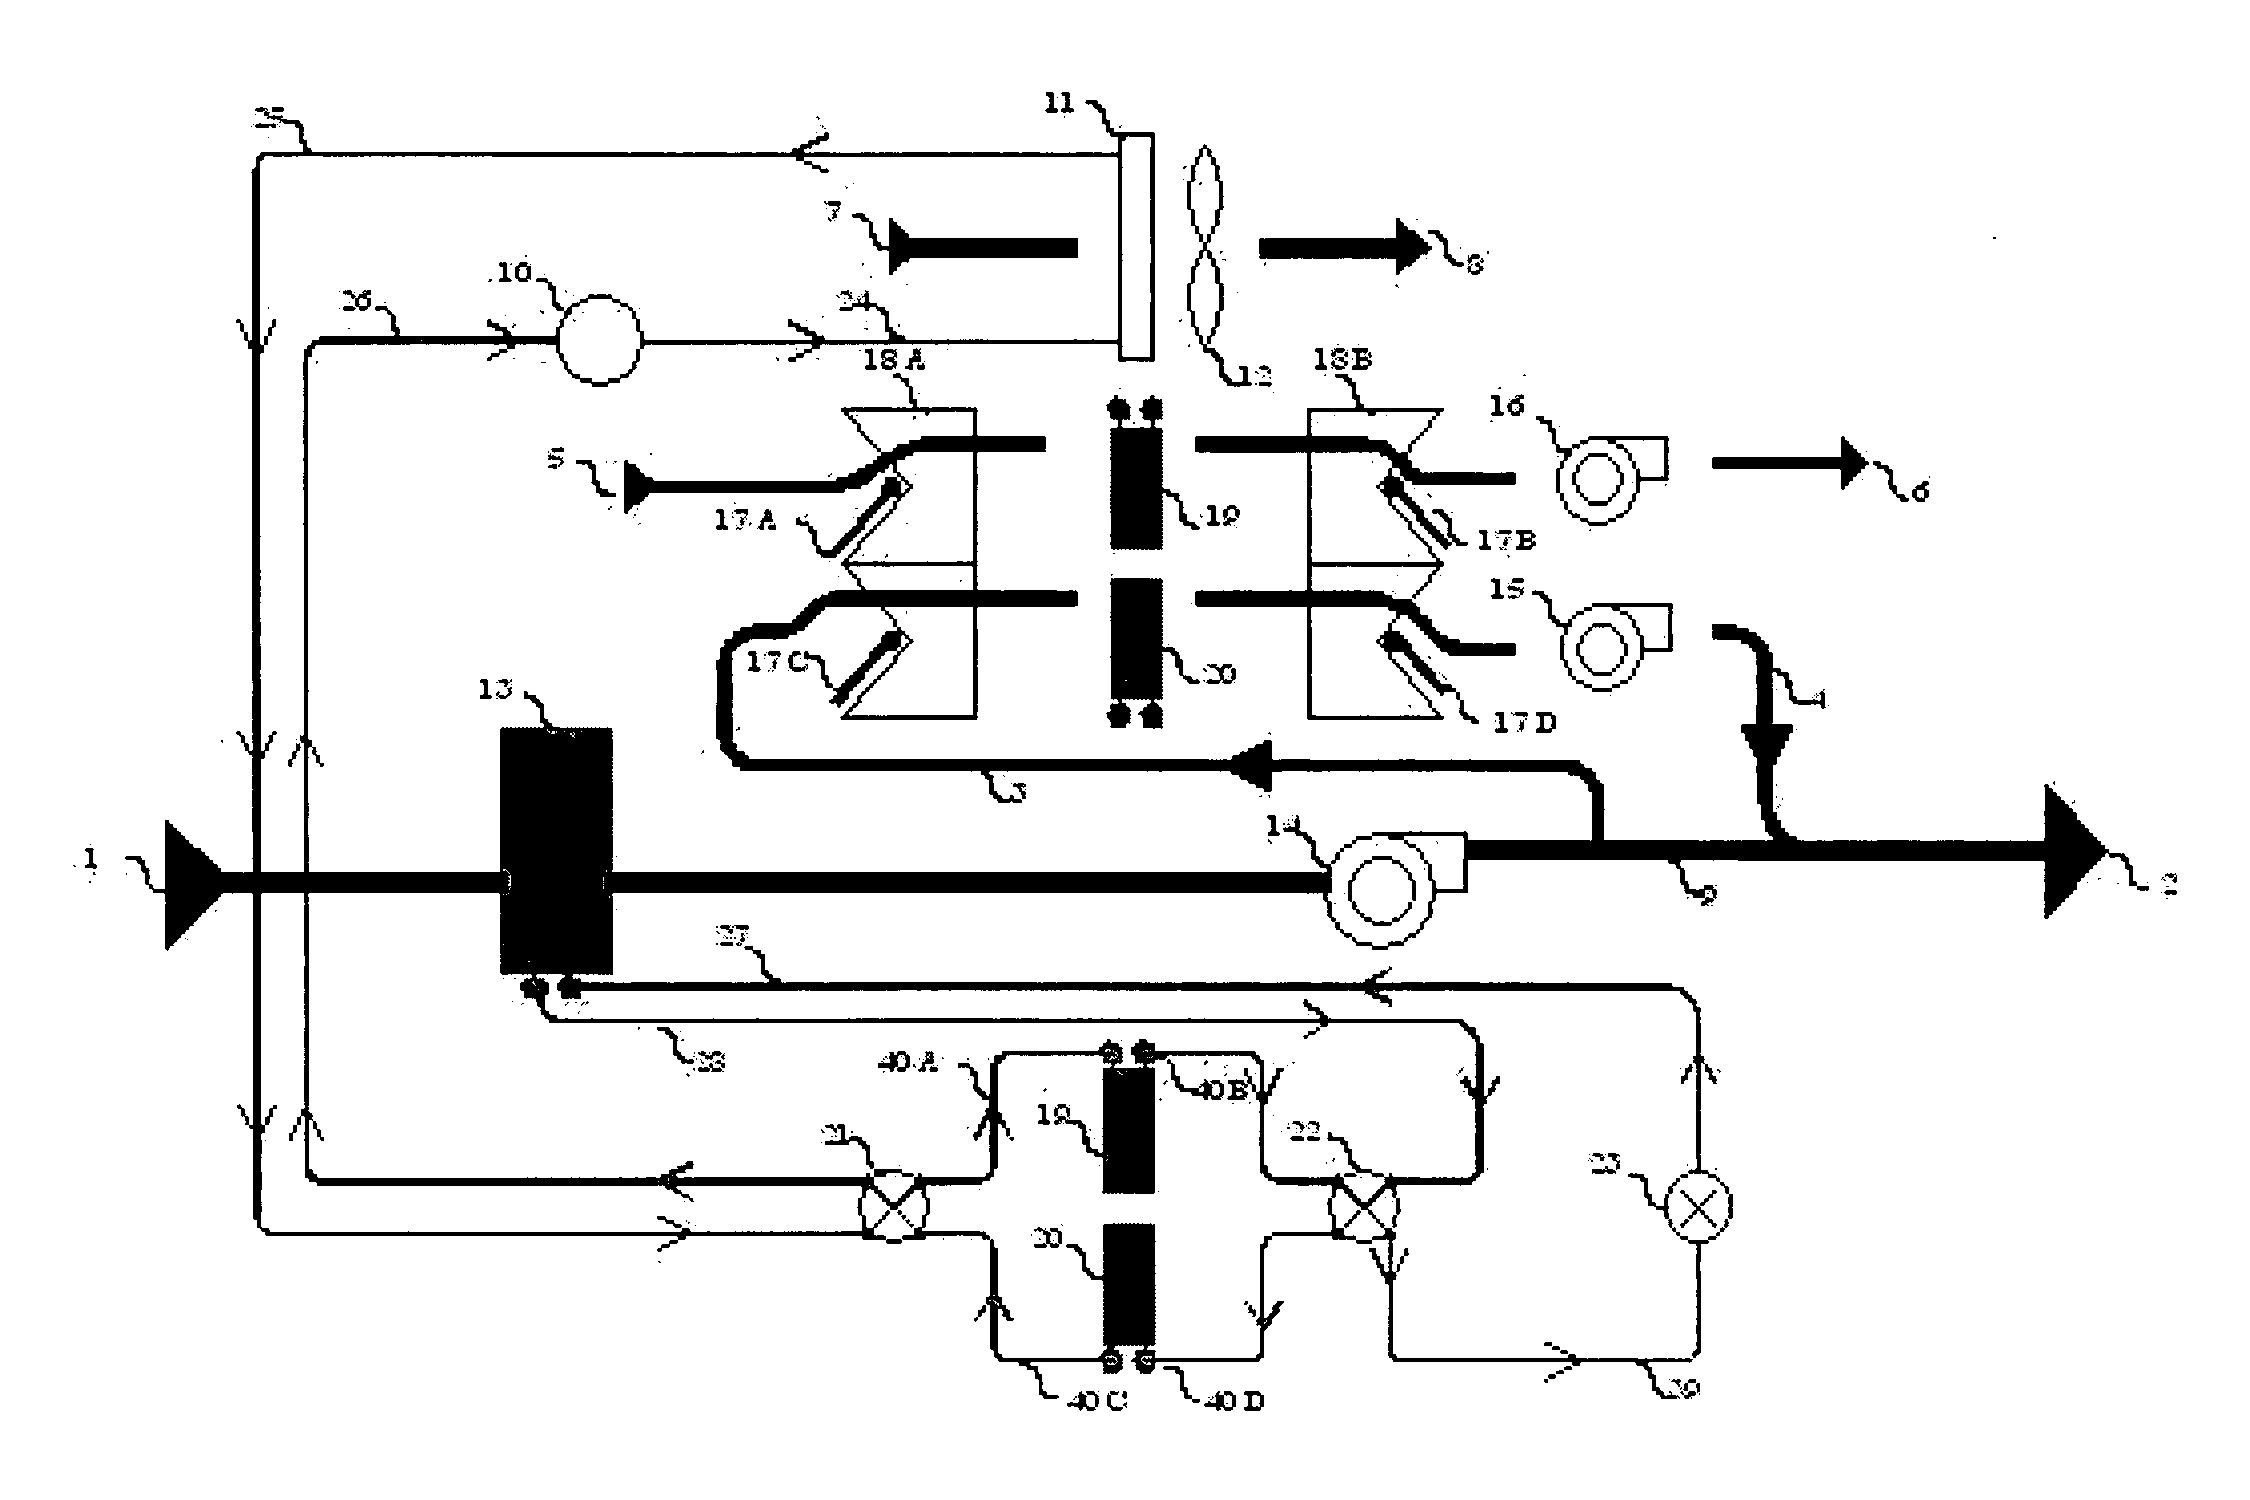 Desiccant-assisted air conditioning system and process